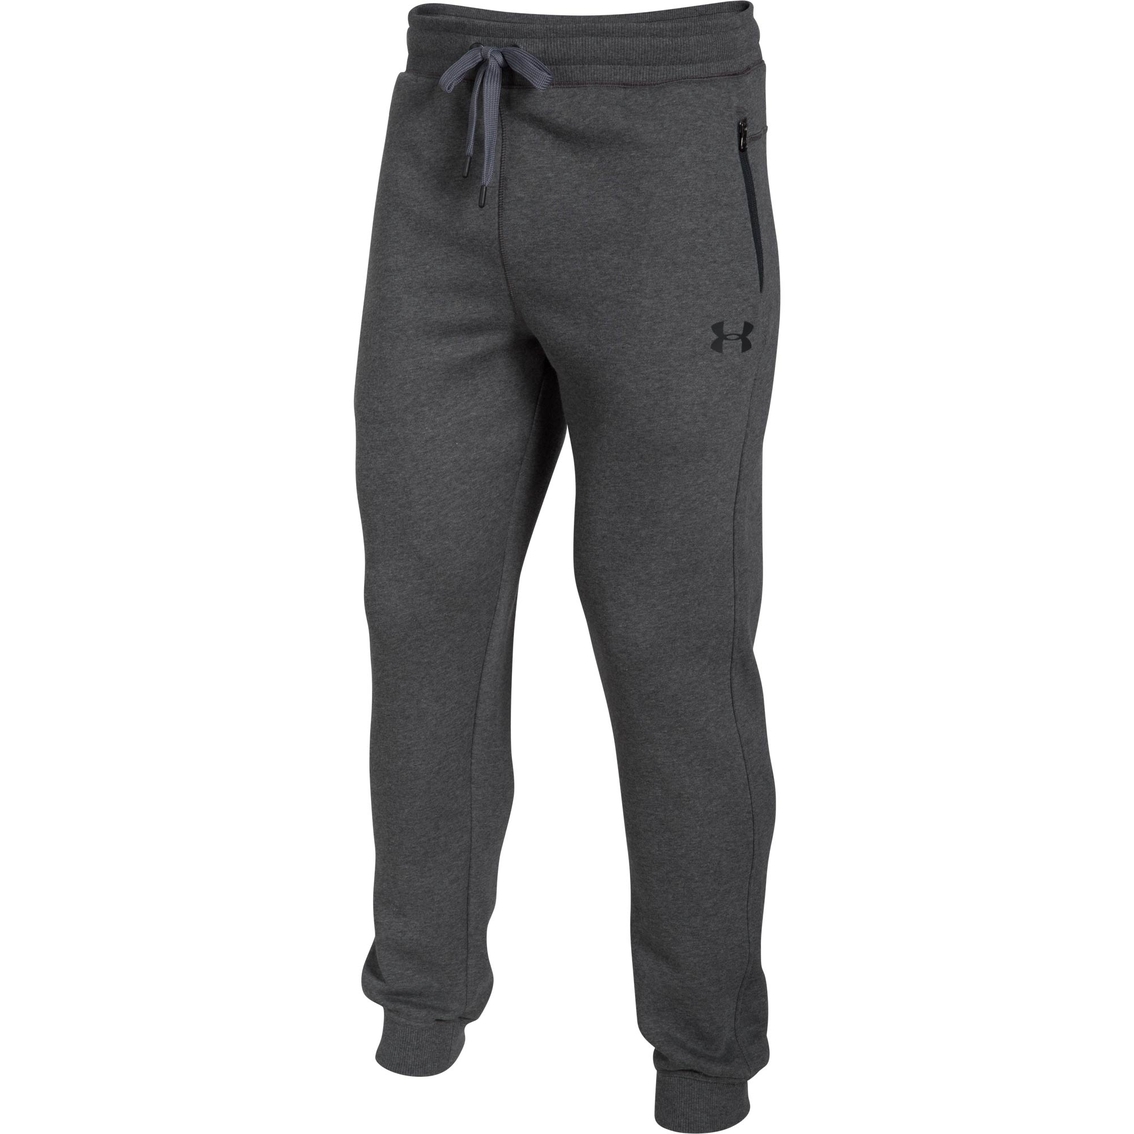 Under Armour Ua Soho Fleece Pants, Patches, Clothing & Accessories